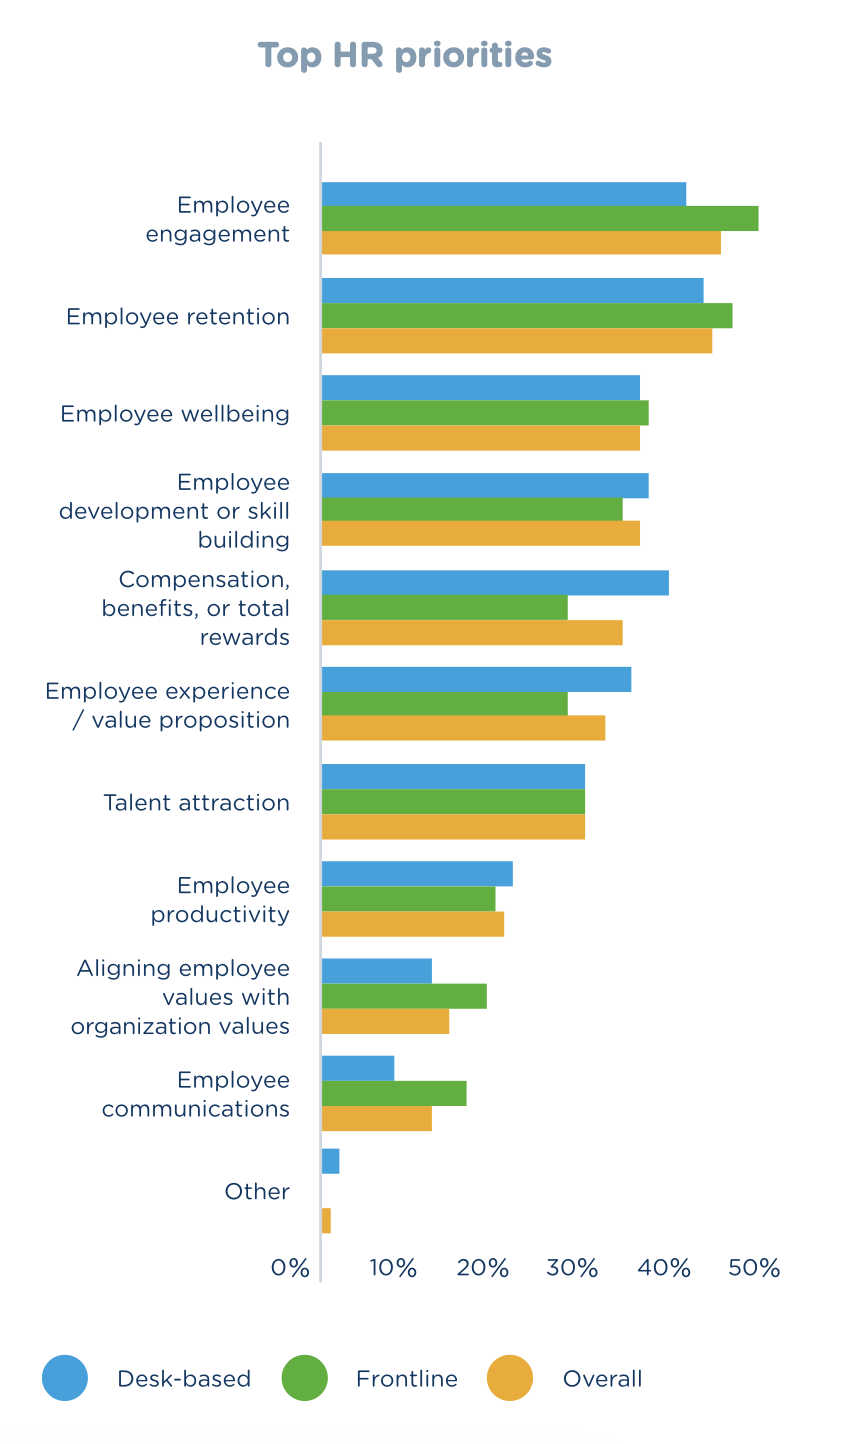 For organizations overall, the top 3 HR priorities are employee engagement, retention and wellbeing.